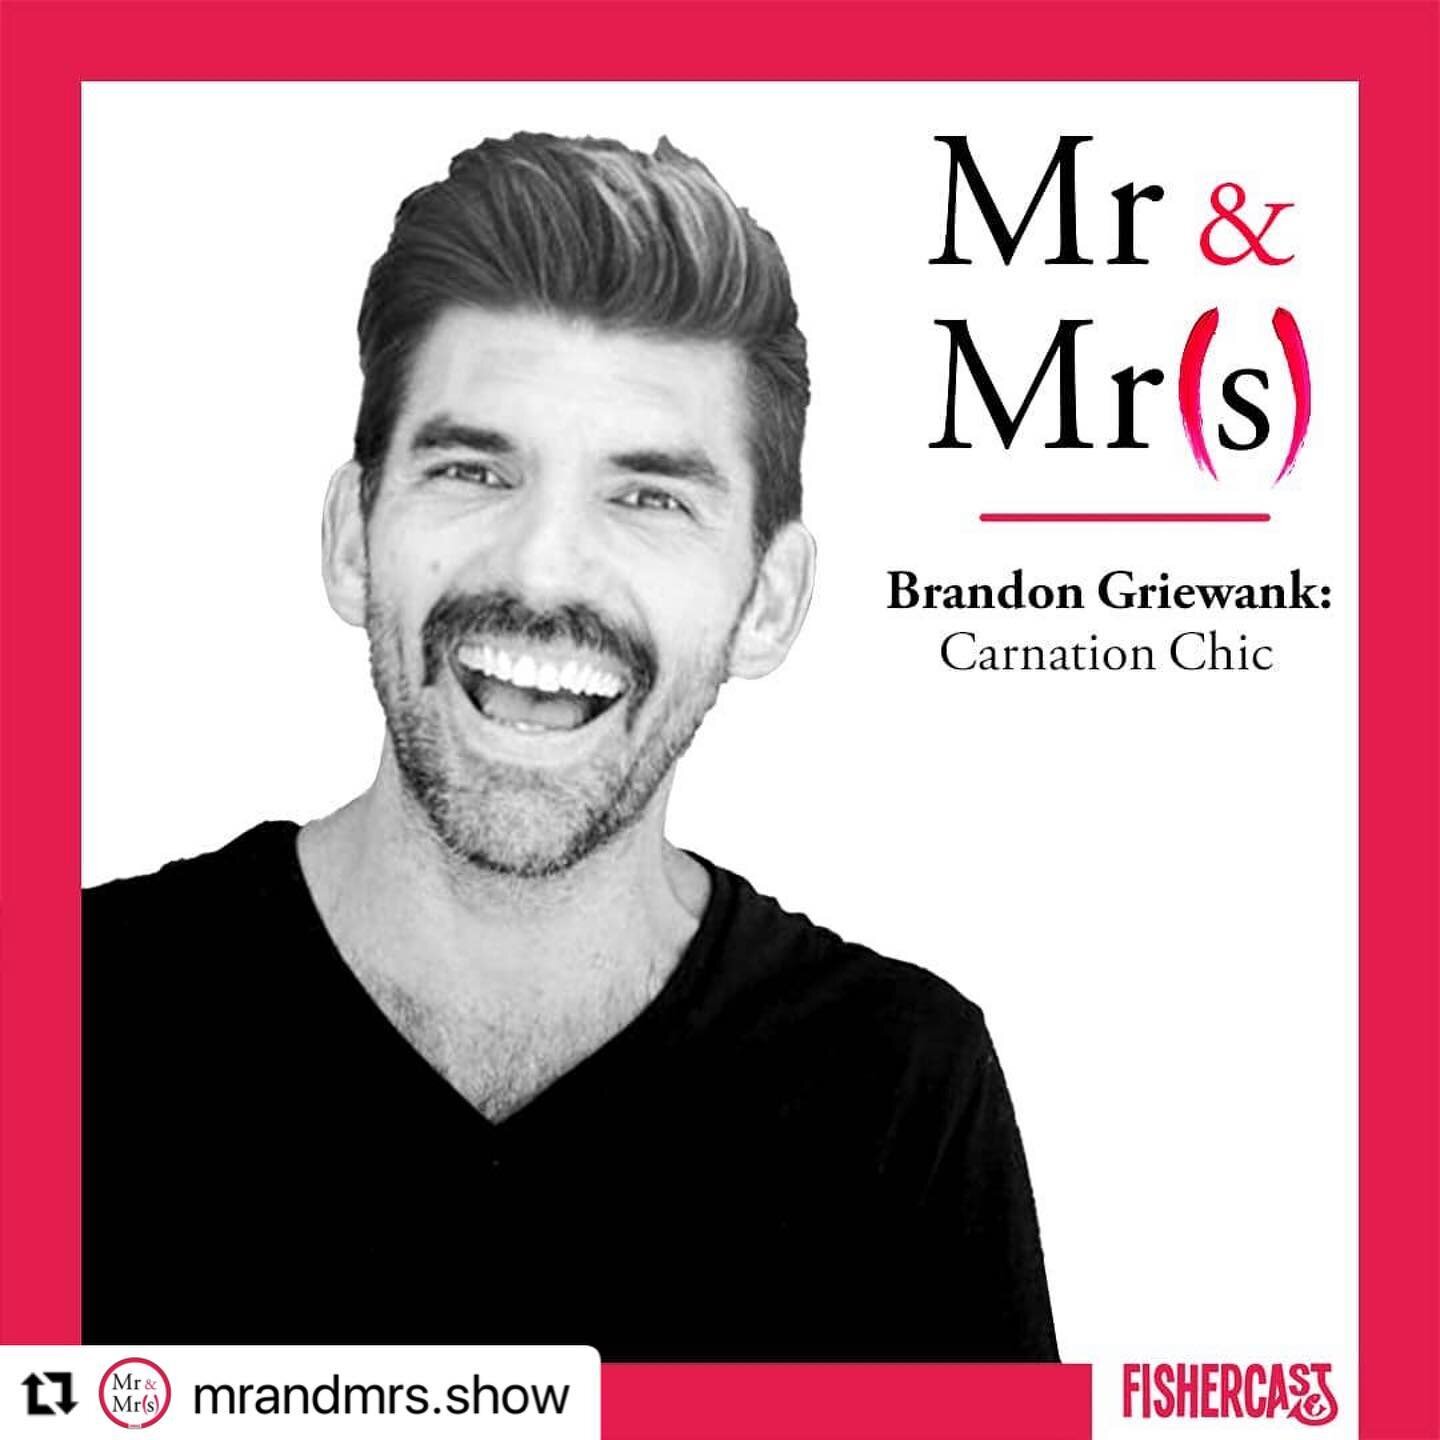 Y&rsquo;all know I love a good podcast! Podcasts and audiobooks are my studio companions and the @mrandmrs.show has been something I look forward to each week. So, it was such an honor to lose my podcast virginity to these two inspiring artists 😉 sh